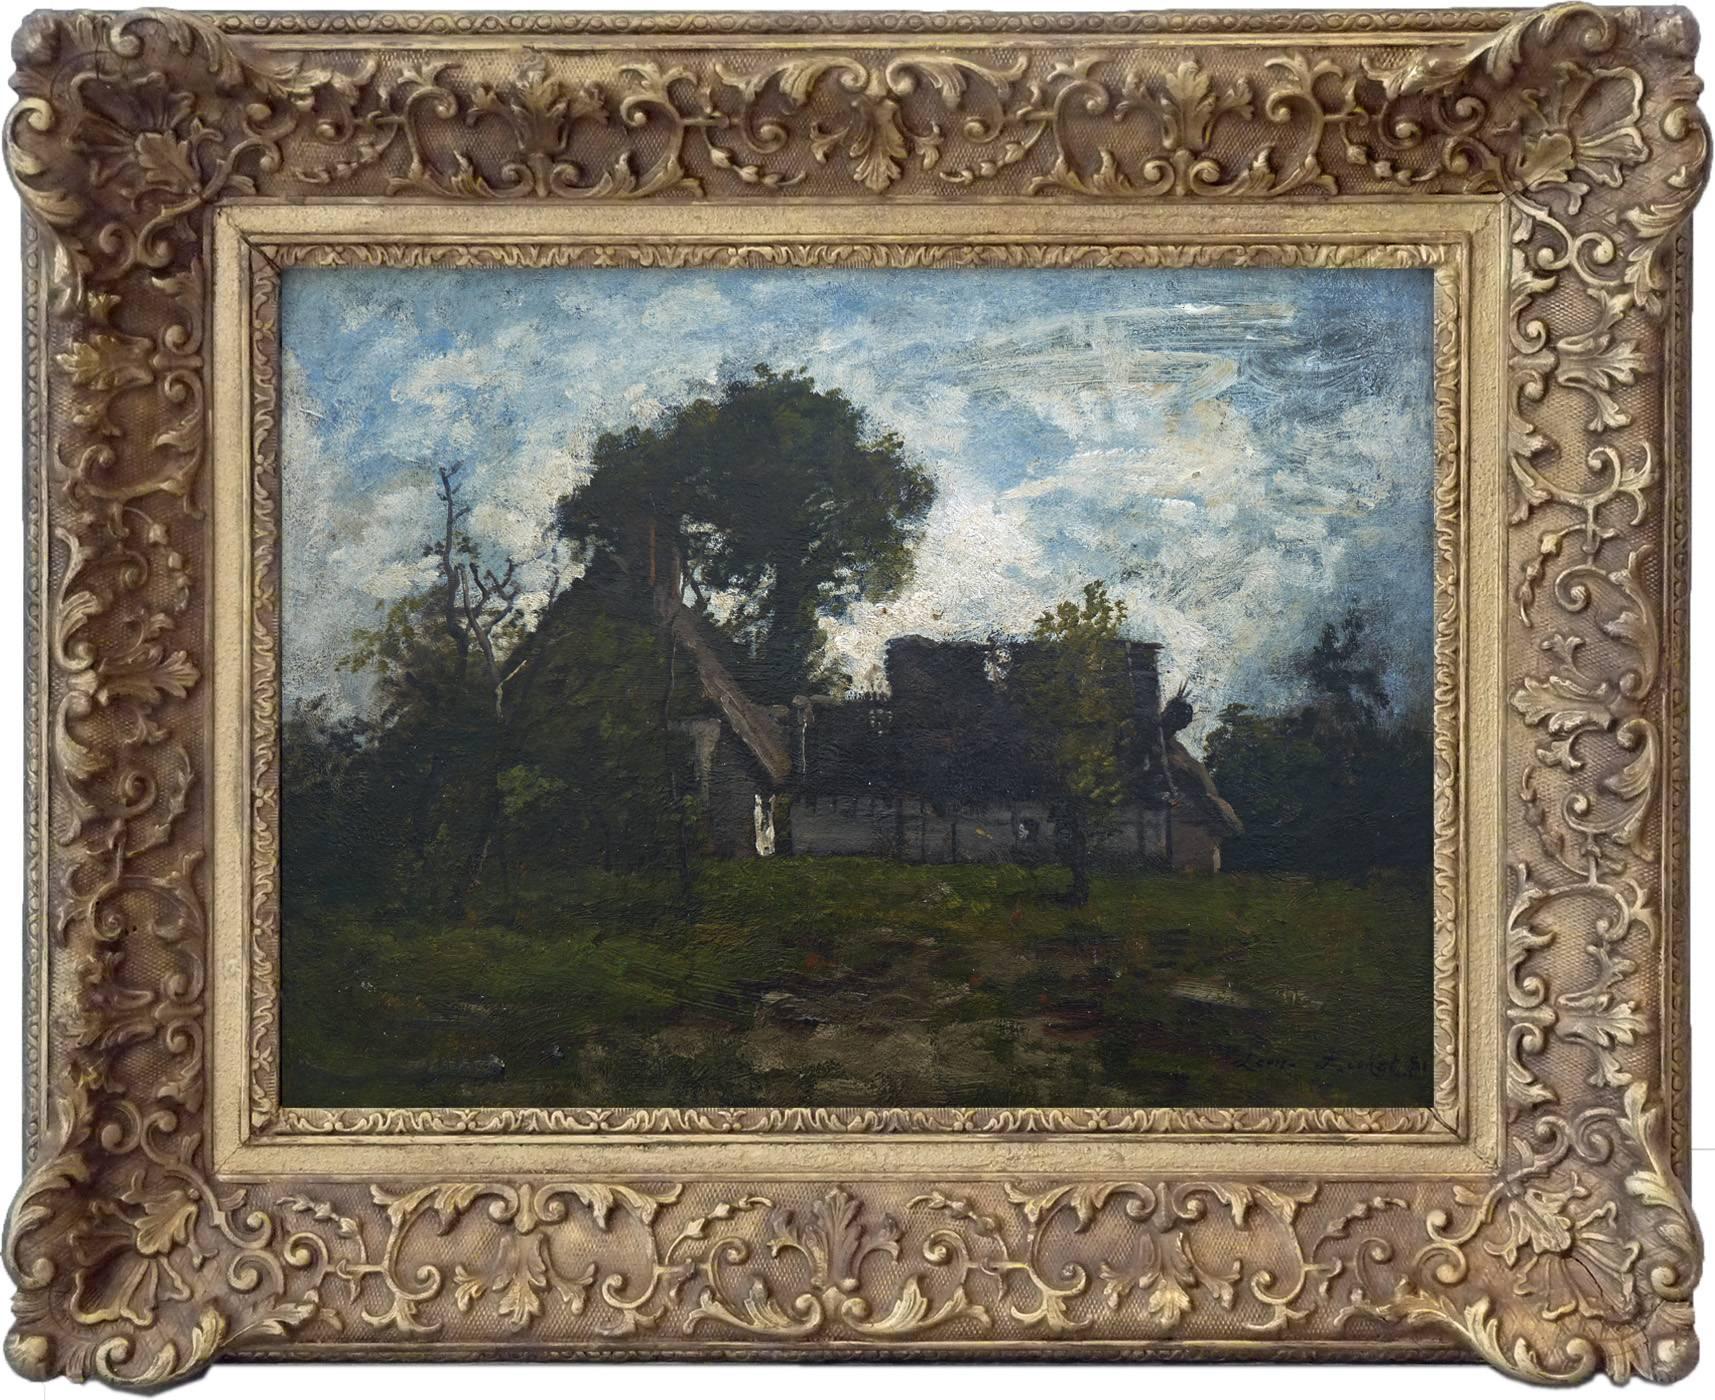 Oil on cardboard, 10.63 x 14.57 in. (27 x 37 cm)
Signed lower right and dated (18)81
Housed in a period frame, size 16.54 x 20.47 in. (42 x 52 cm)

The works of Richet particularly live from the chiaroscuro effect and the tonal color of the